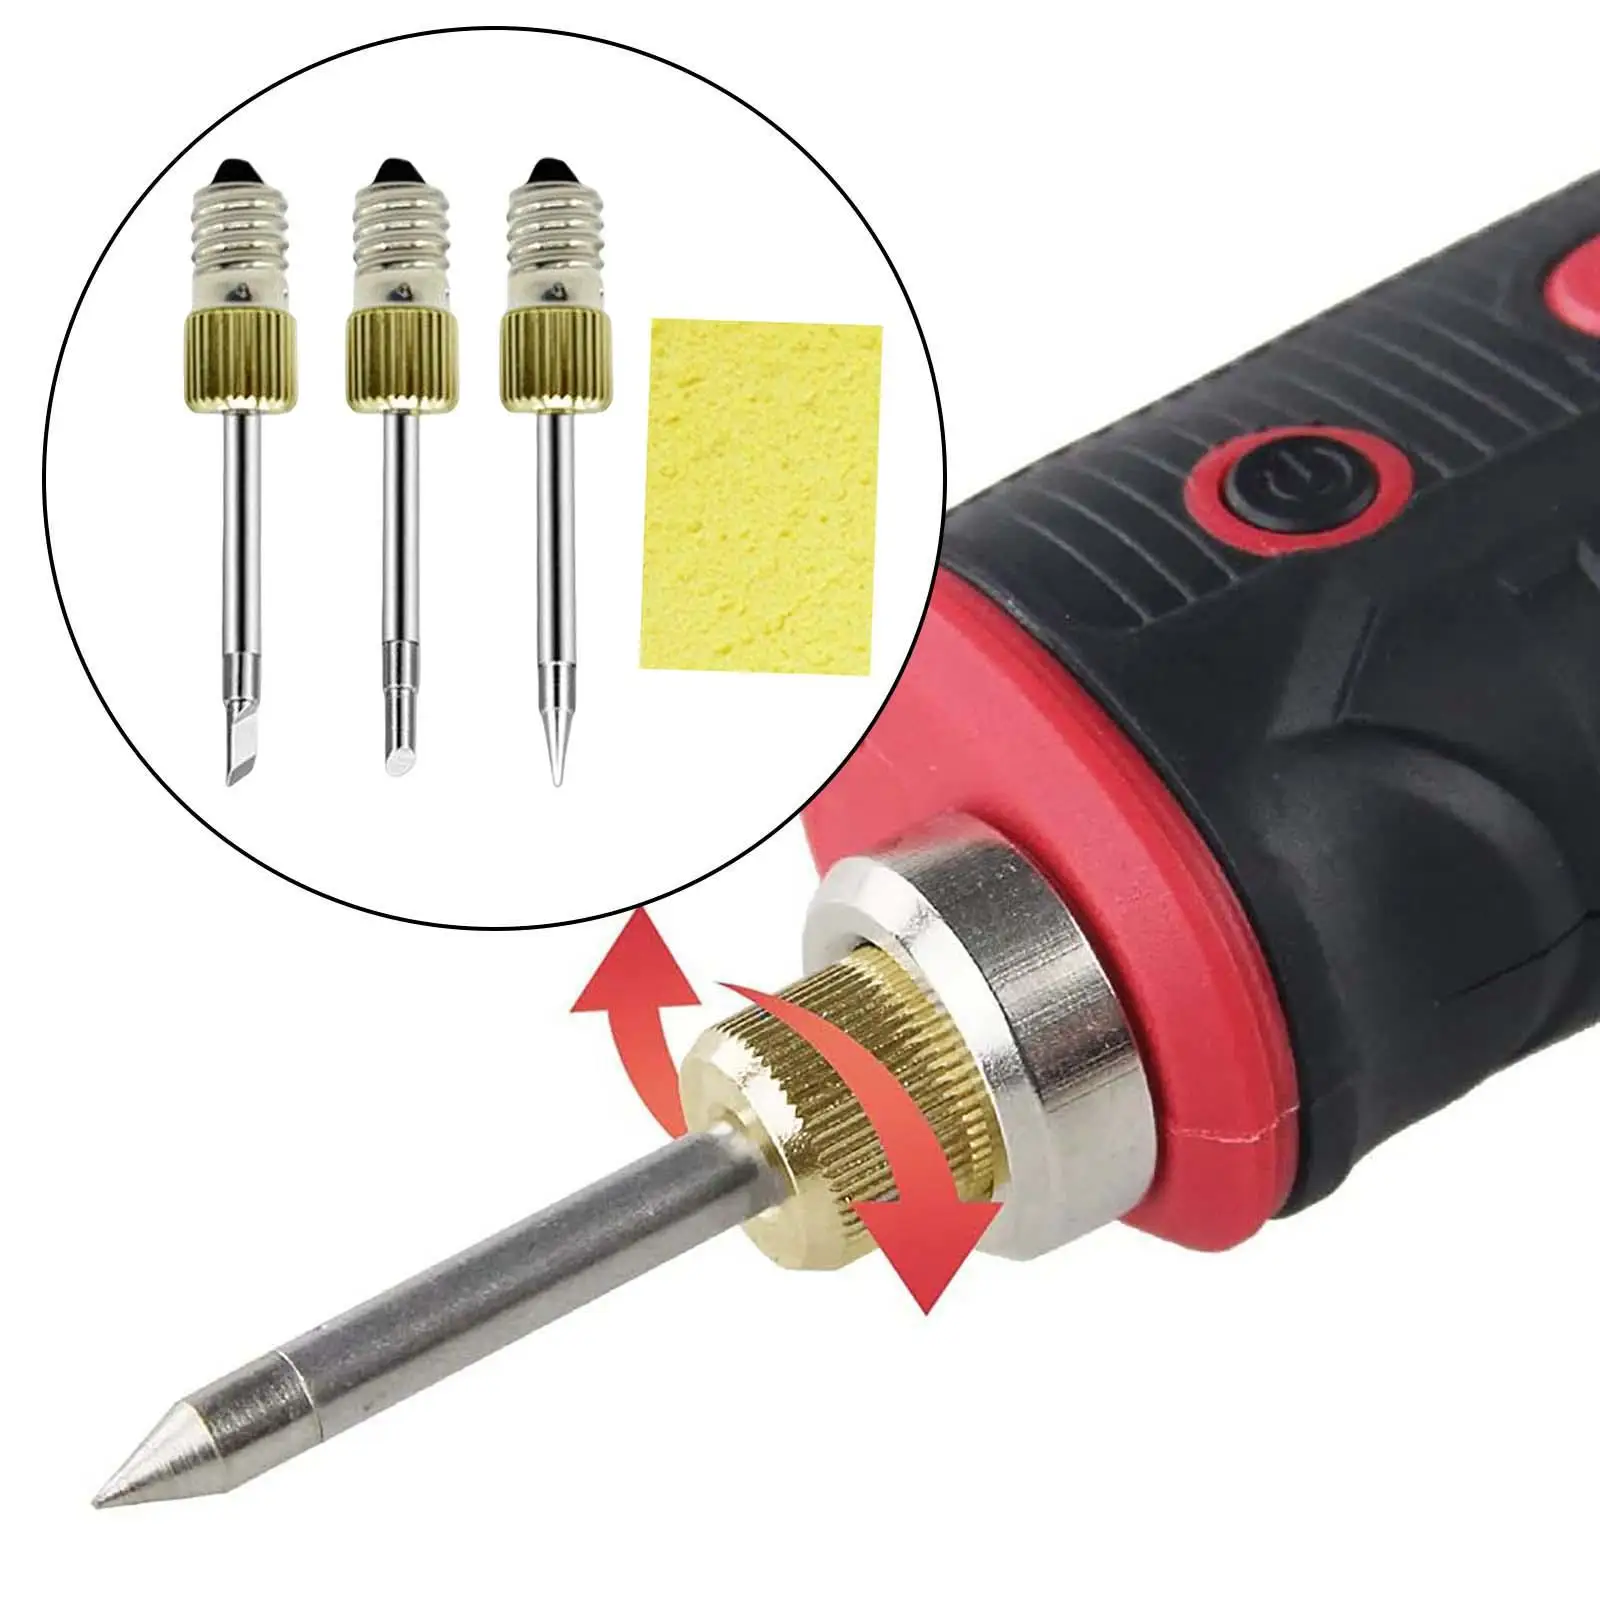 3Pcs Soldering Iron Tips USB Soldering Head E10 Interface Professional Welding Tips Soldering Tips Accessories